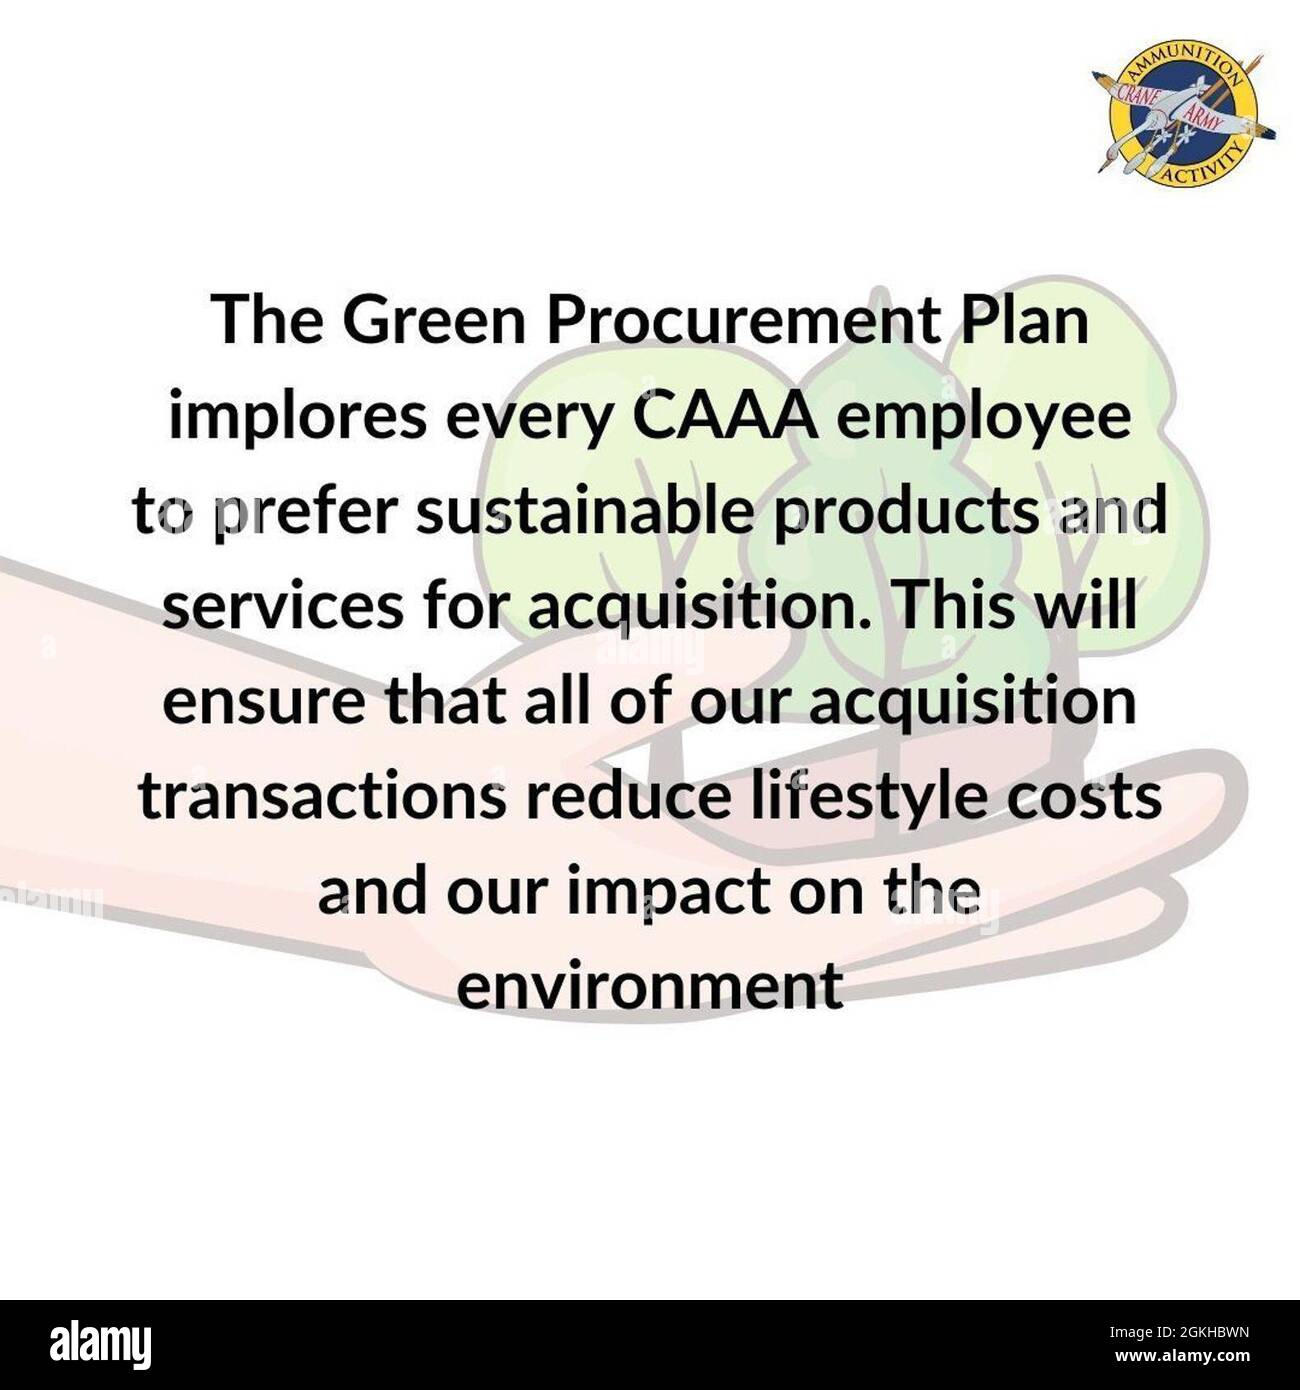 The Green Procurement Plan implores every Crane Army Ammunition Activity employee to prefer sustainable products and services for acquisition. This will ensure that all of our acquisition transactions reduce lifestyle costs and our impact on the environment. Stock Photo